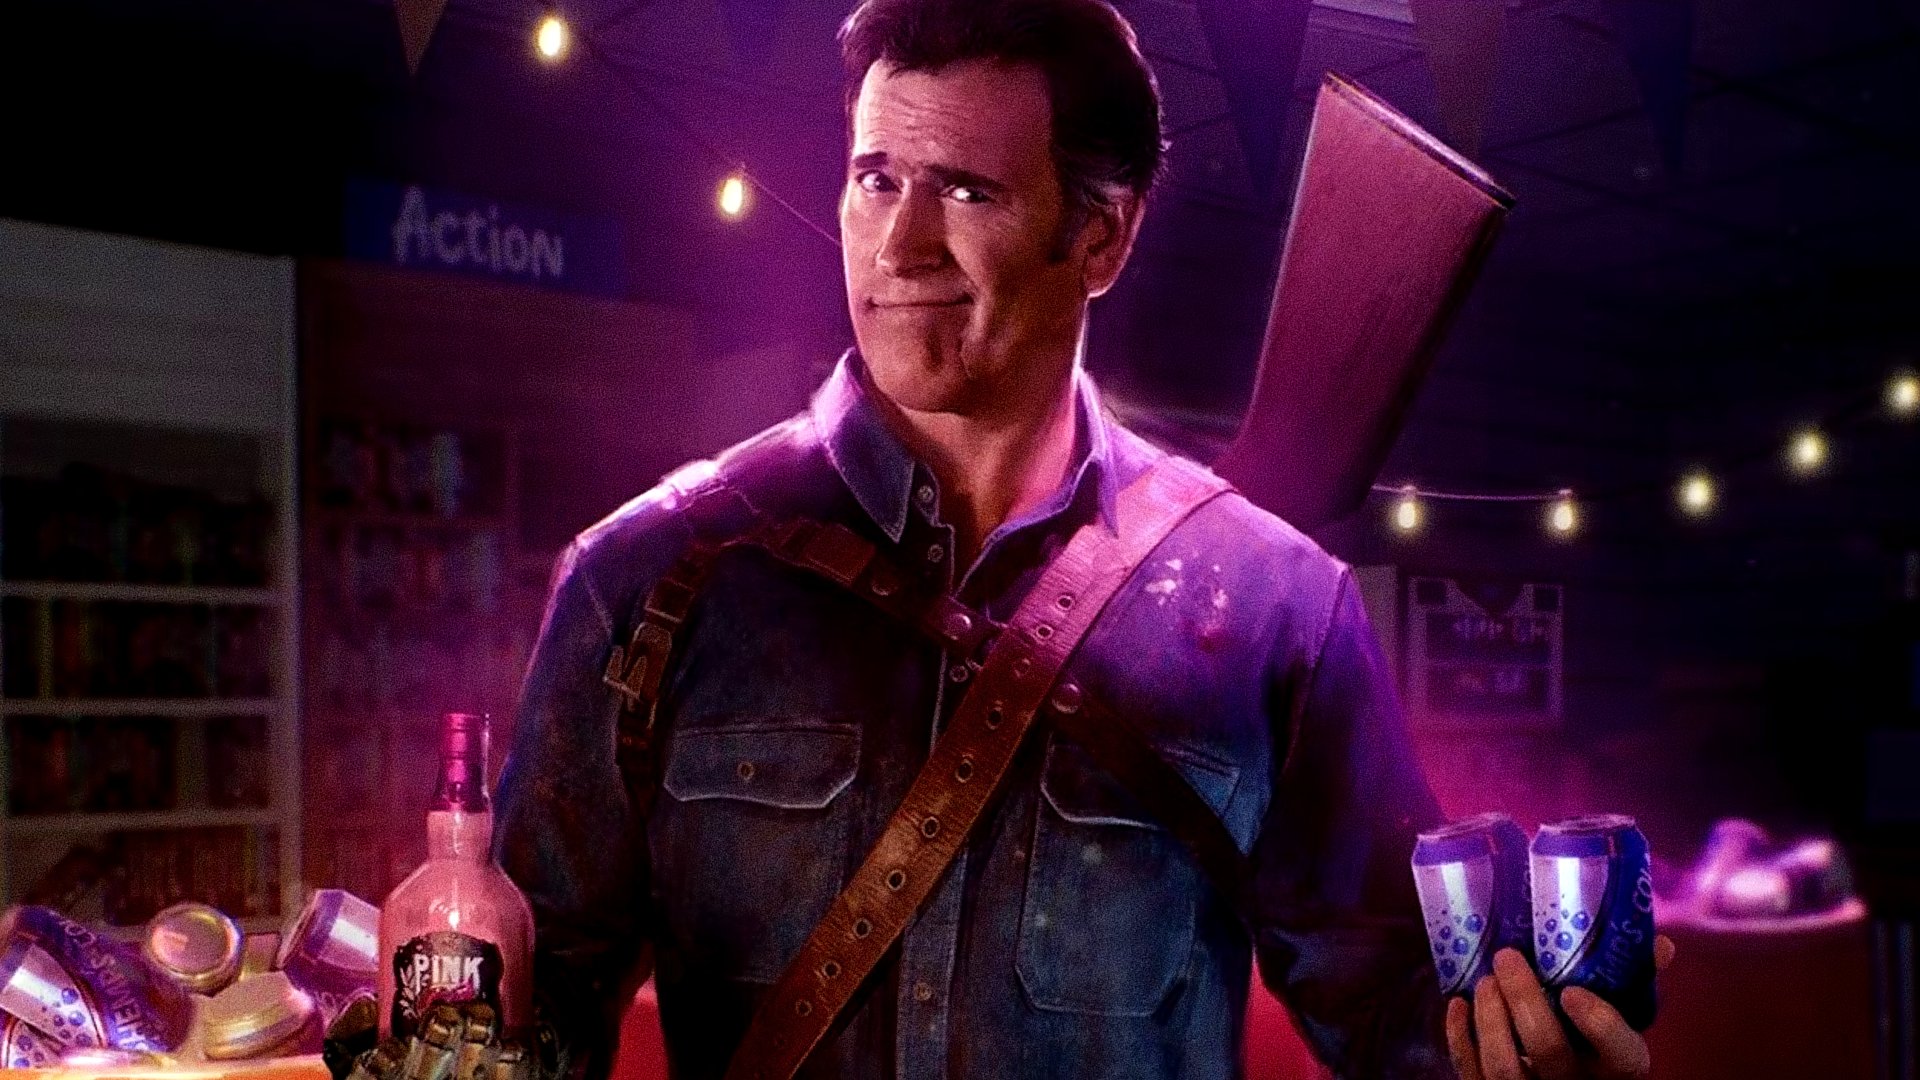 Evil Dead: The Game - GOTY Edition Upgrade - Epic Games Store